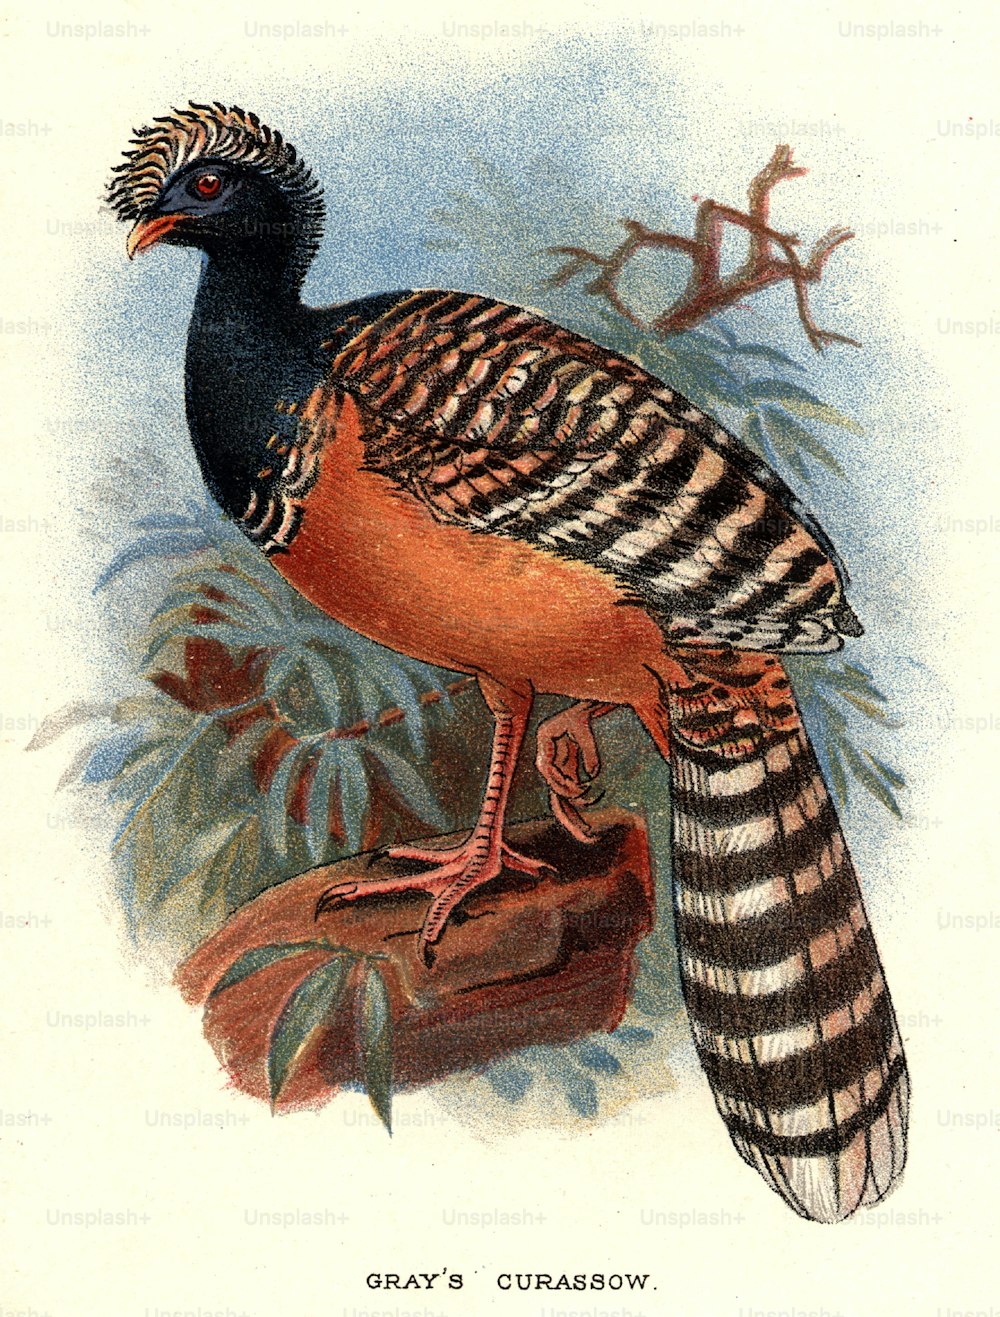 circa 1800:  Gray's Curassow, a large turkey-like bird of South America.  (Photo by Hulton Archive/Getty Images)